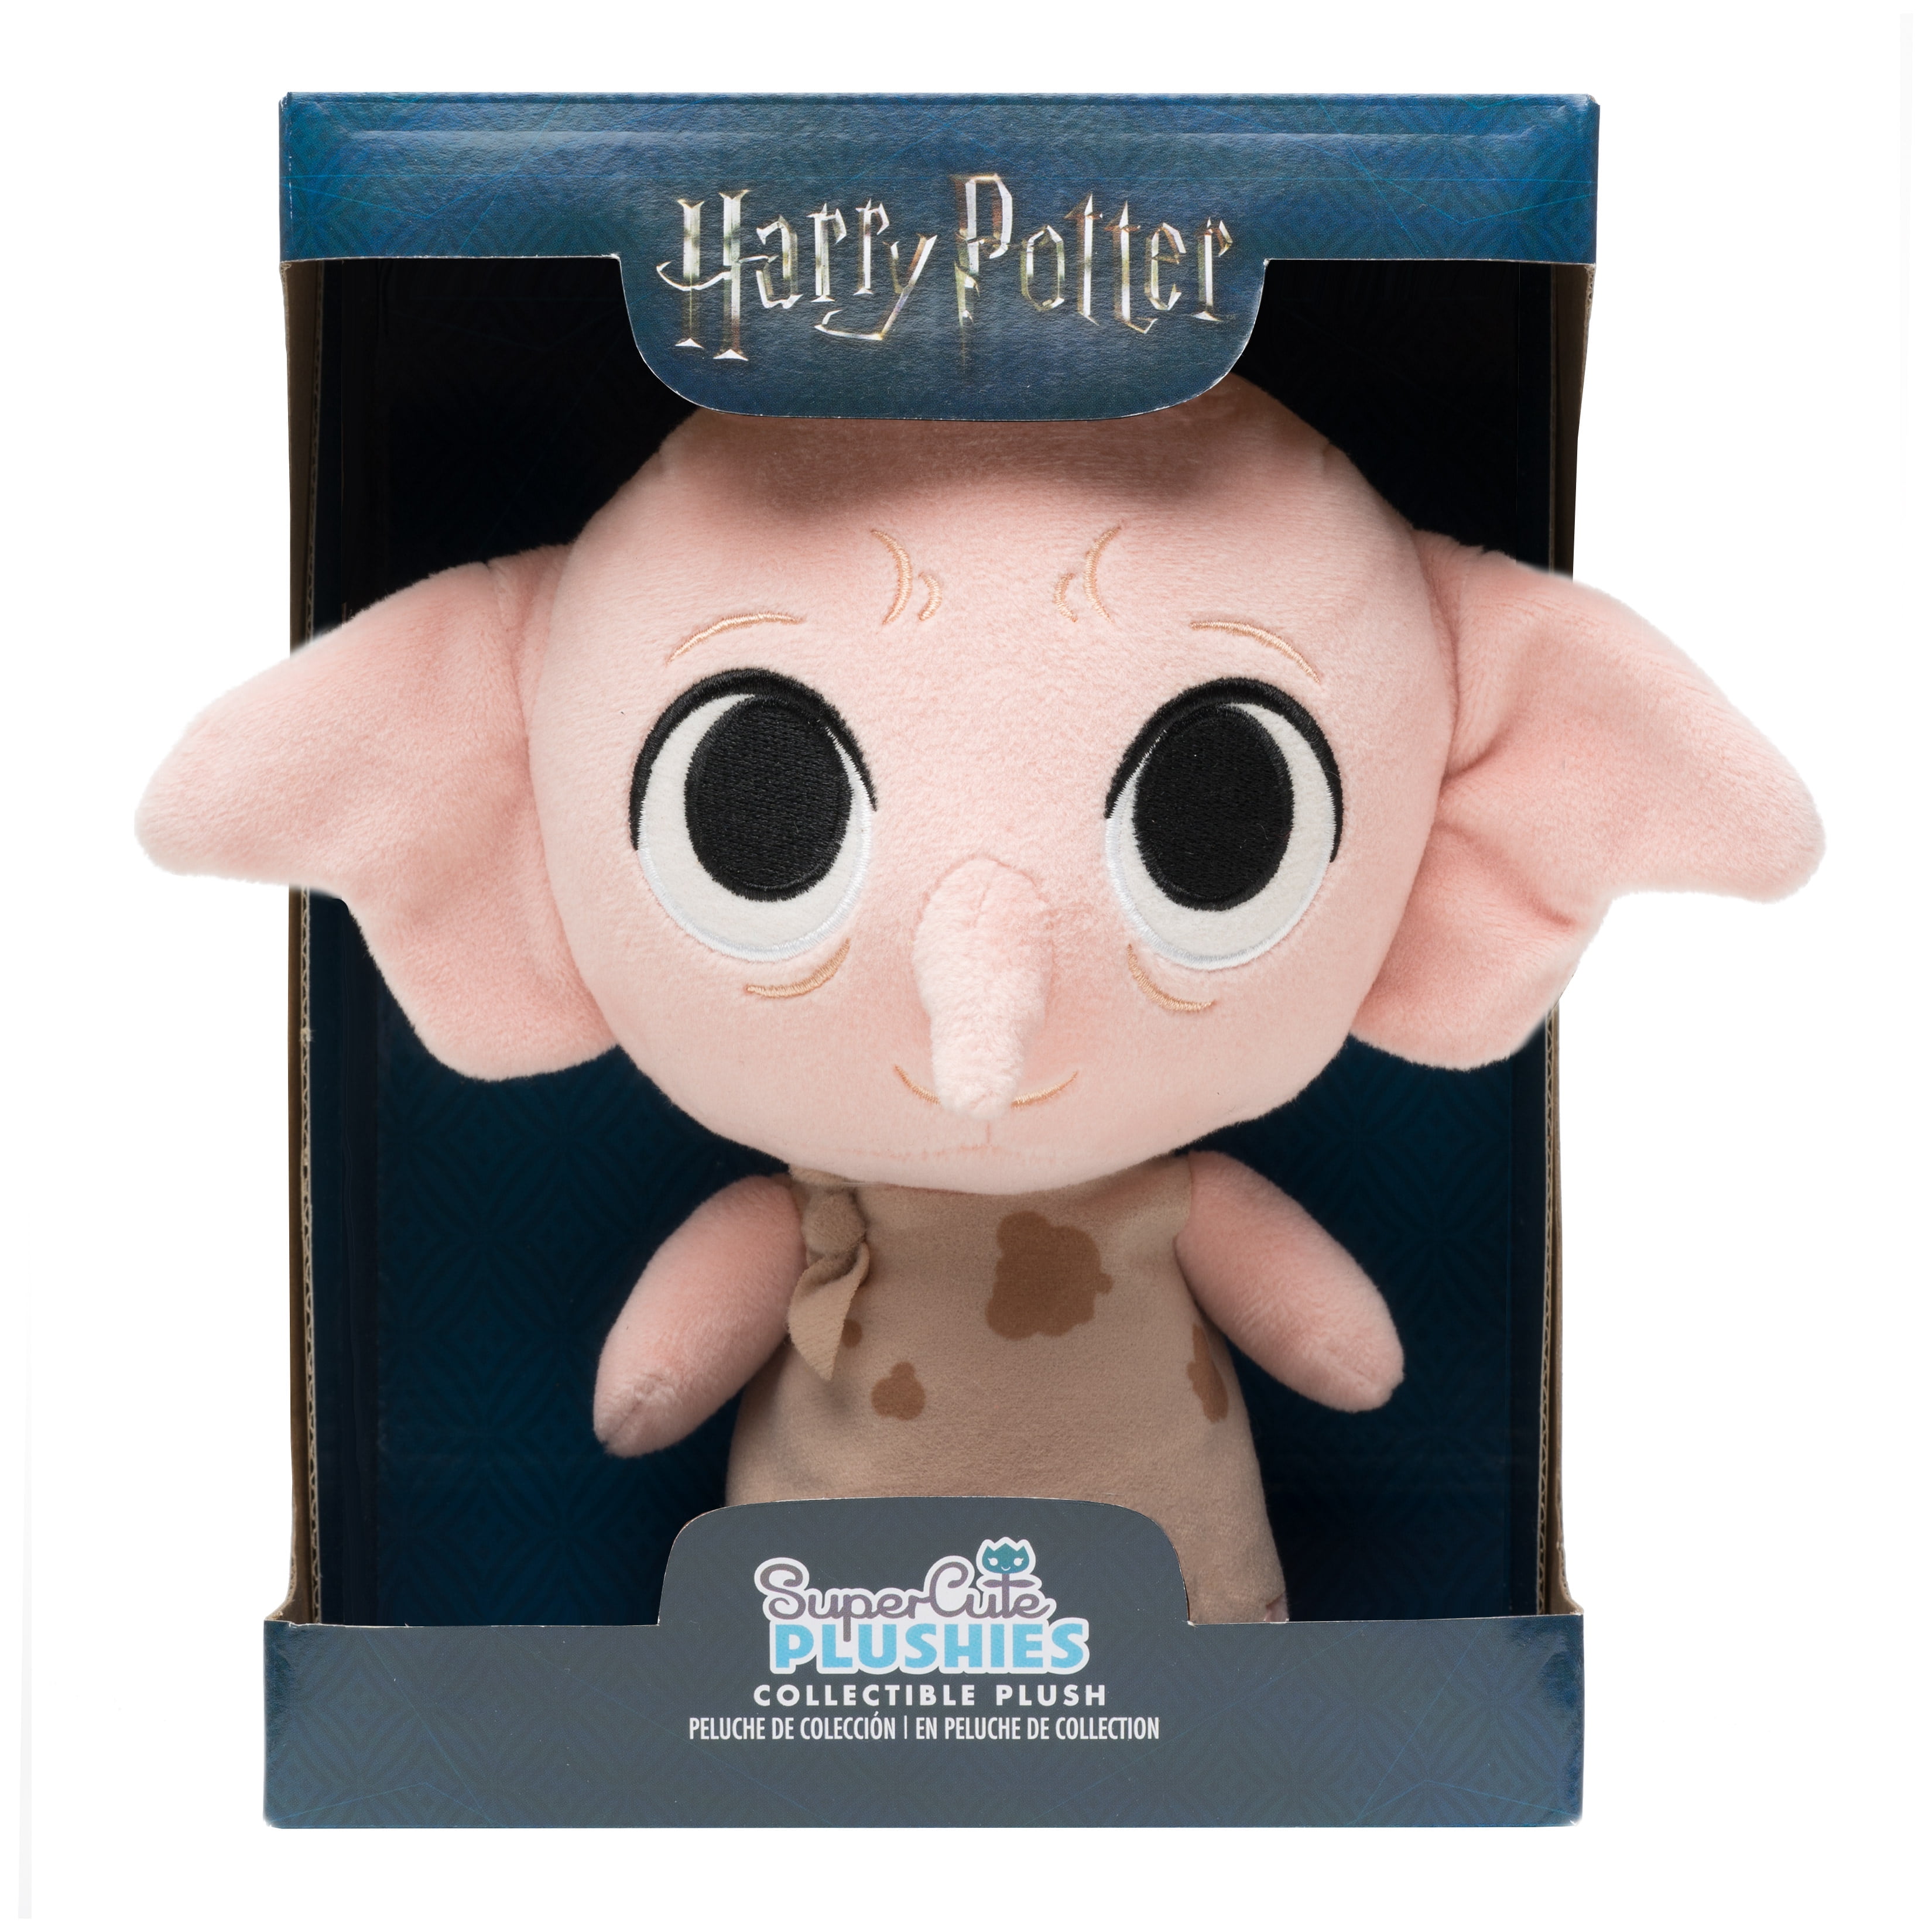 Harry Potter Dobby Feature Poseable Talking Plush With Sounds 